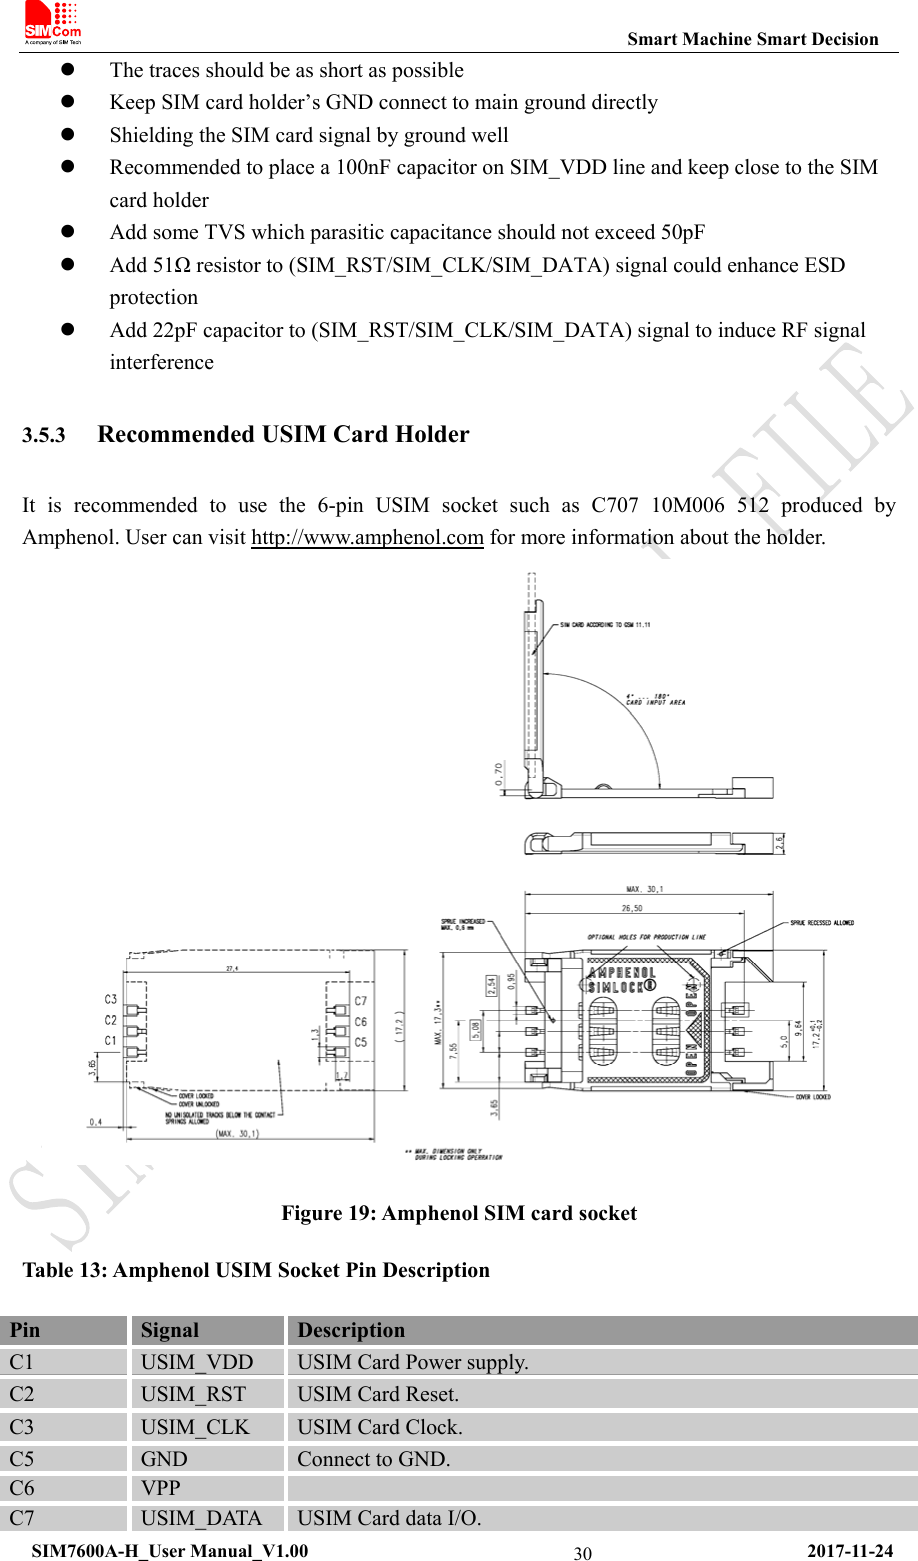                                                           Smart Machine Smart Decision  SIM7600A-H_User Manual_V1.00                                                     2017-11-24 30 The traces should be as short as possible  Keep SIM card holder’s GND connect to main ground directly  Shielding the SIM card signal by ground well    Recommended to place a 100nF capacitor on SIM_VDD line and keep close to the SIM card holder  Add some TVS which parasitic capacitance should not exceed 50pF  Add 51Ω resistor to (SIM_RST/SIM_CLK/SIM_DATA) signal could enhance ESD protection  Add 22pF capacitor to (SIM_RST/SIM_CLK/SIM_DATA) signal to induce RF signal interference  3.5.3 Recommended USIM Card Holder It is recommended to use the 6-pin USIM socket such as C707 10M006 512 produced by Amphenol. User can visit http://www.amphenol.com for more information about the holder.  Figure 19: Amphenol SIM card socket Table 13: Amphenol USIM Socket Pin Description Pin  Signal  Description C1  USIM_VDD  USIM Card Power supply. C2  USIM_RST  USIM Card Reset. C3  USIM_CLK  USIM Card Clock. C5  GND  Connect to GND. C6  VPP   C7  USIM_DATA  USIM Card data I/O. 